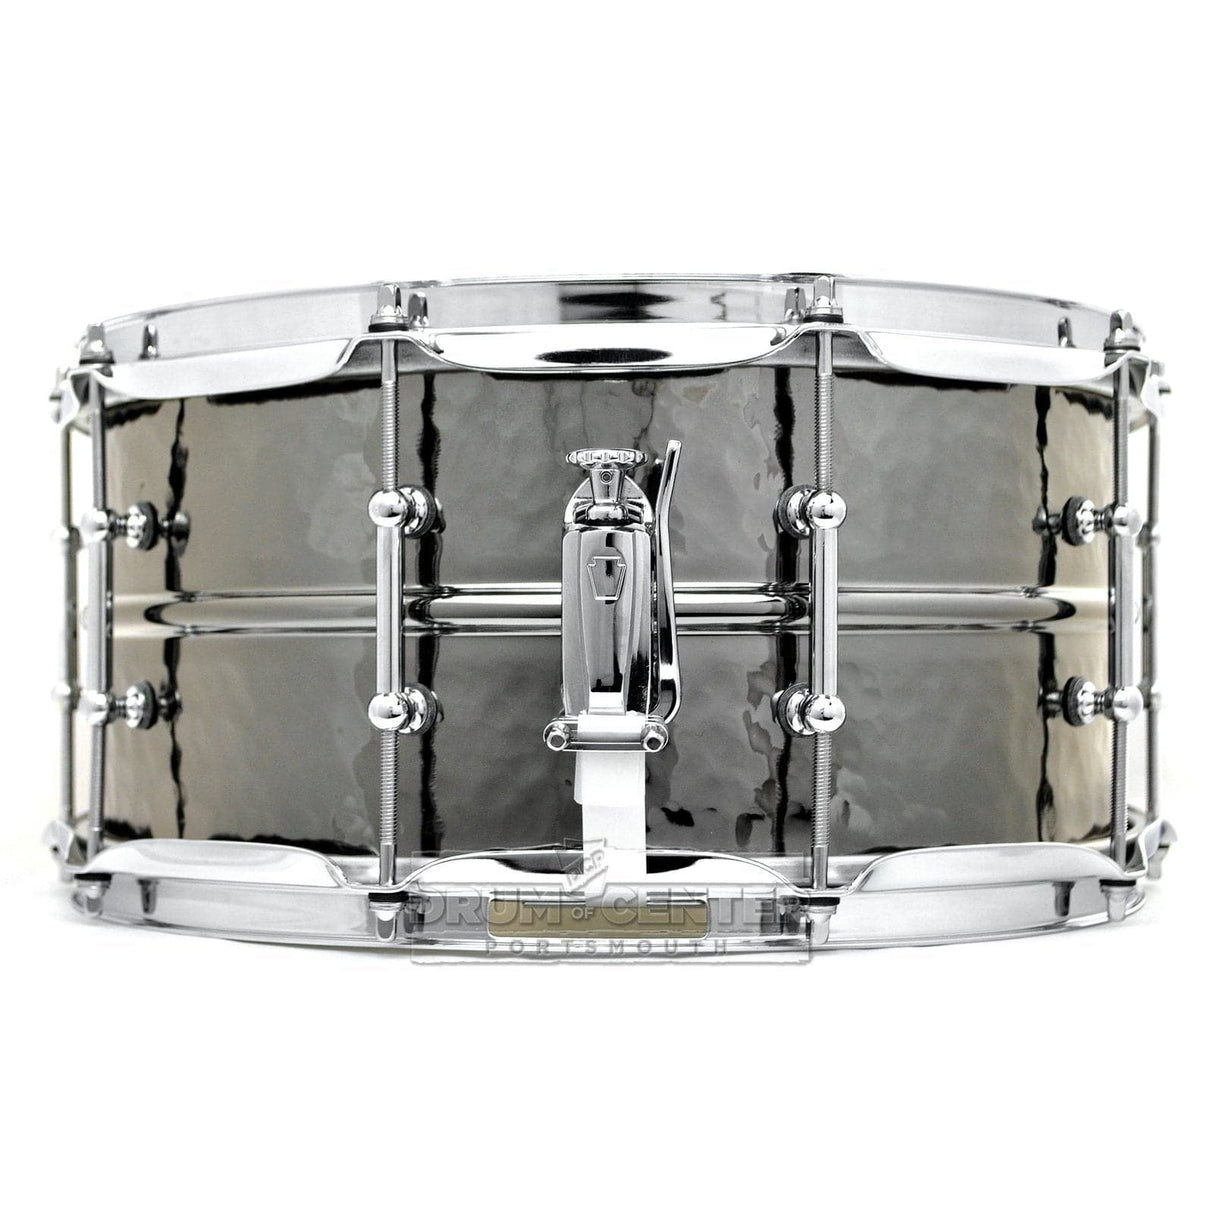 Ludwig Black Beauty Snare Drum 14x6.5 Hammered w/Tube Lugs